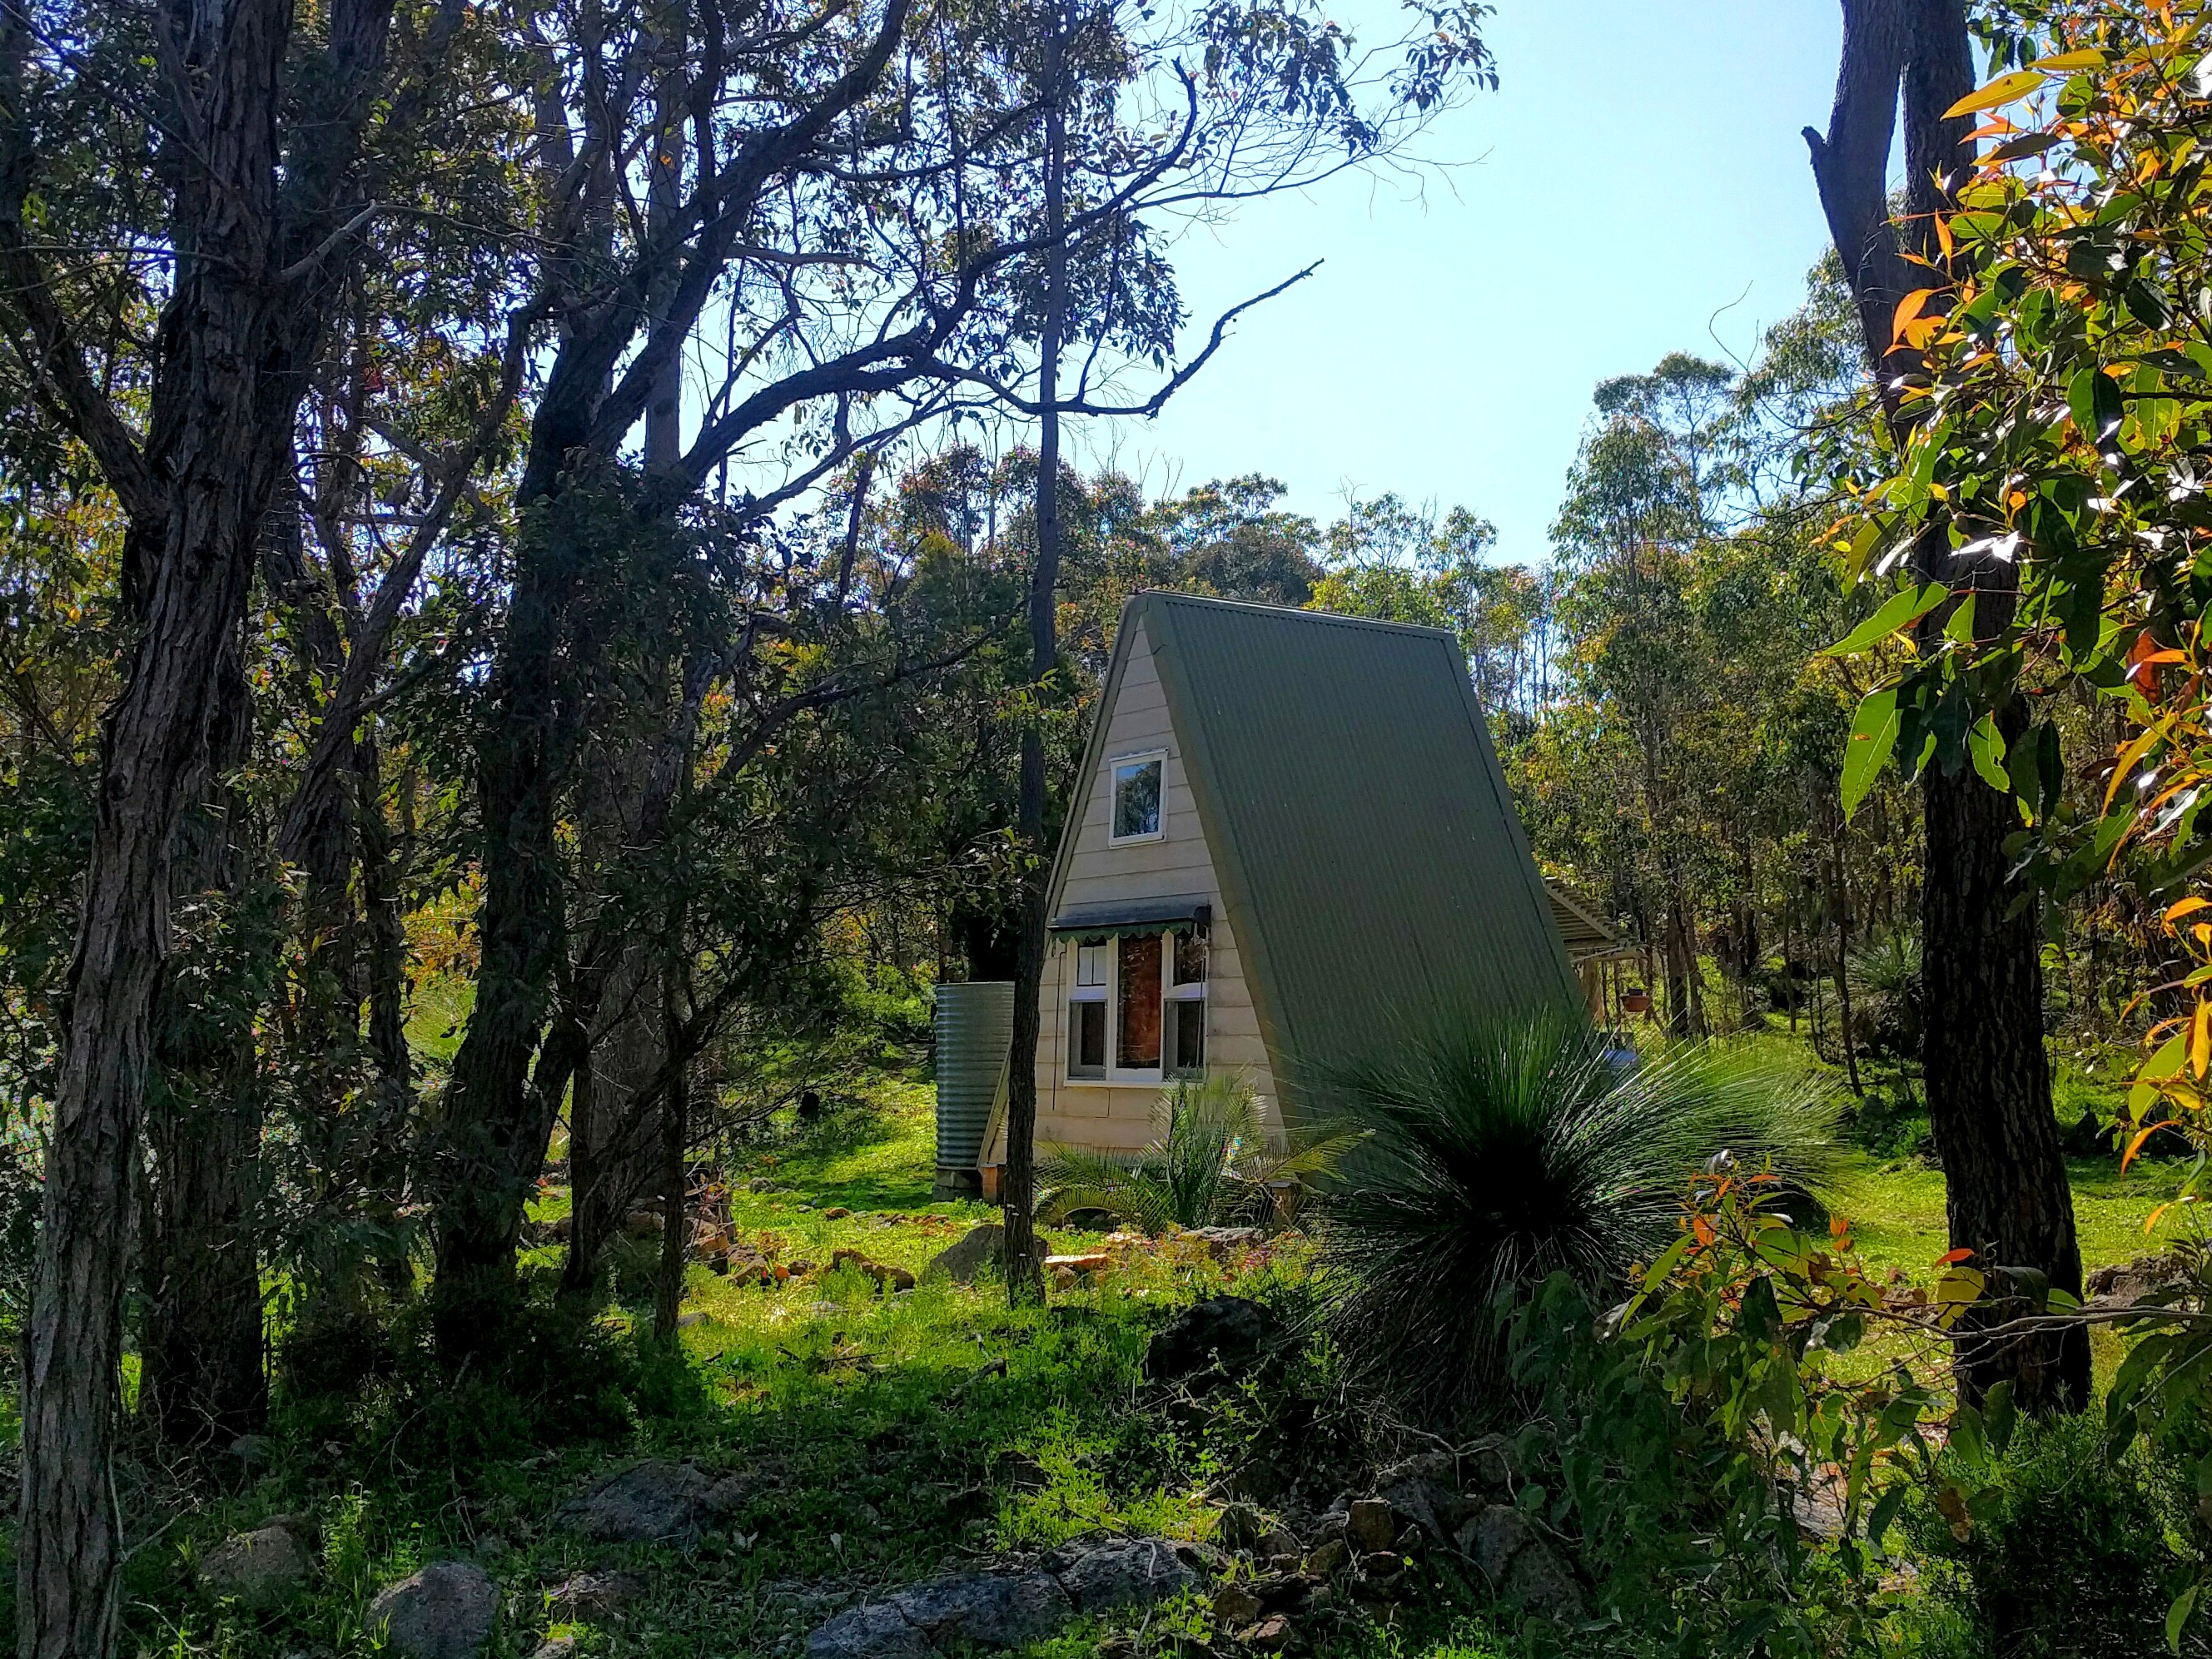 Image of a hut in the forest